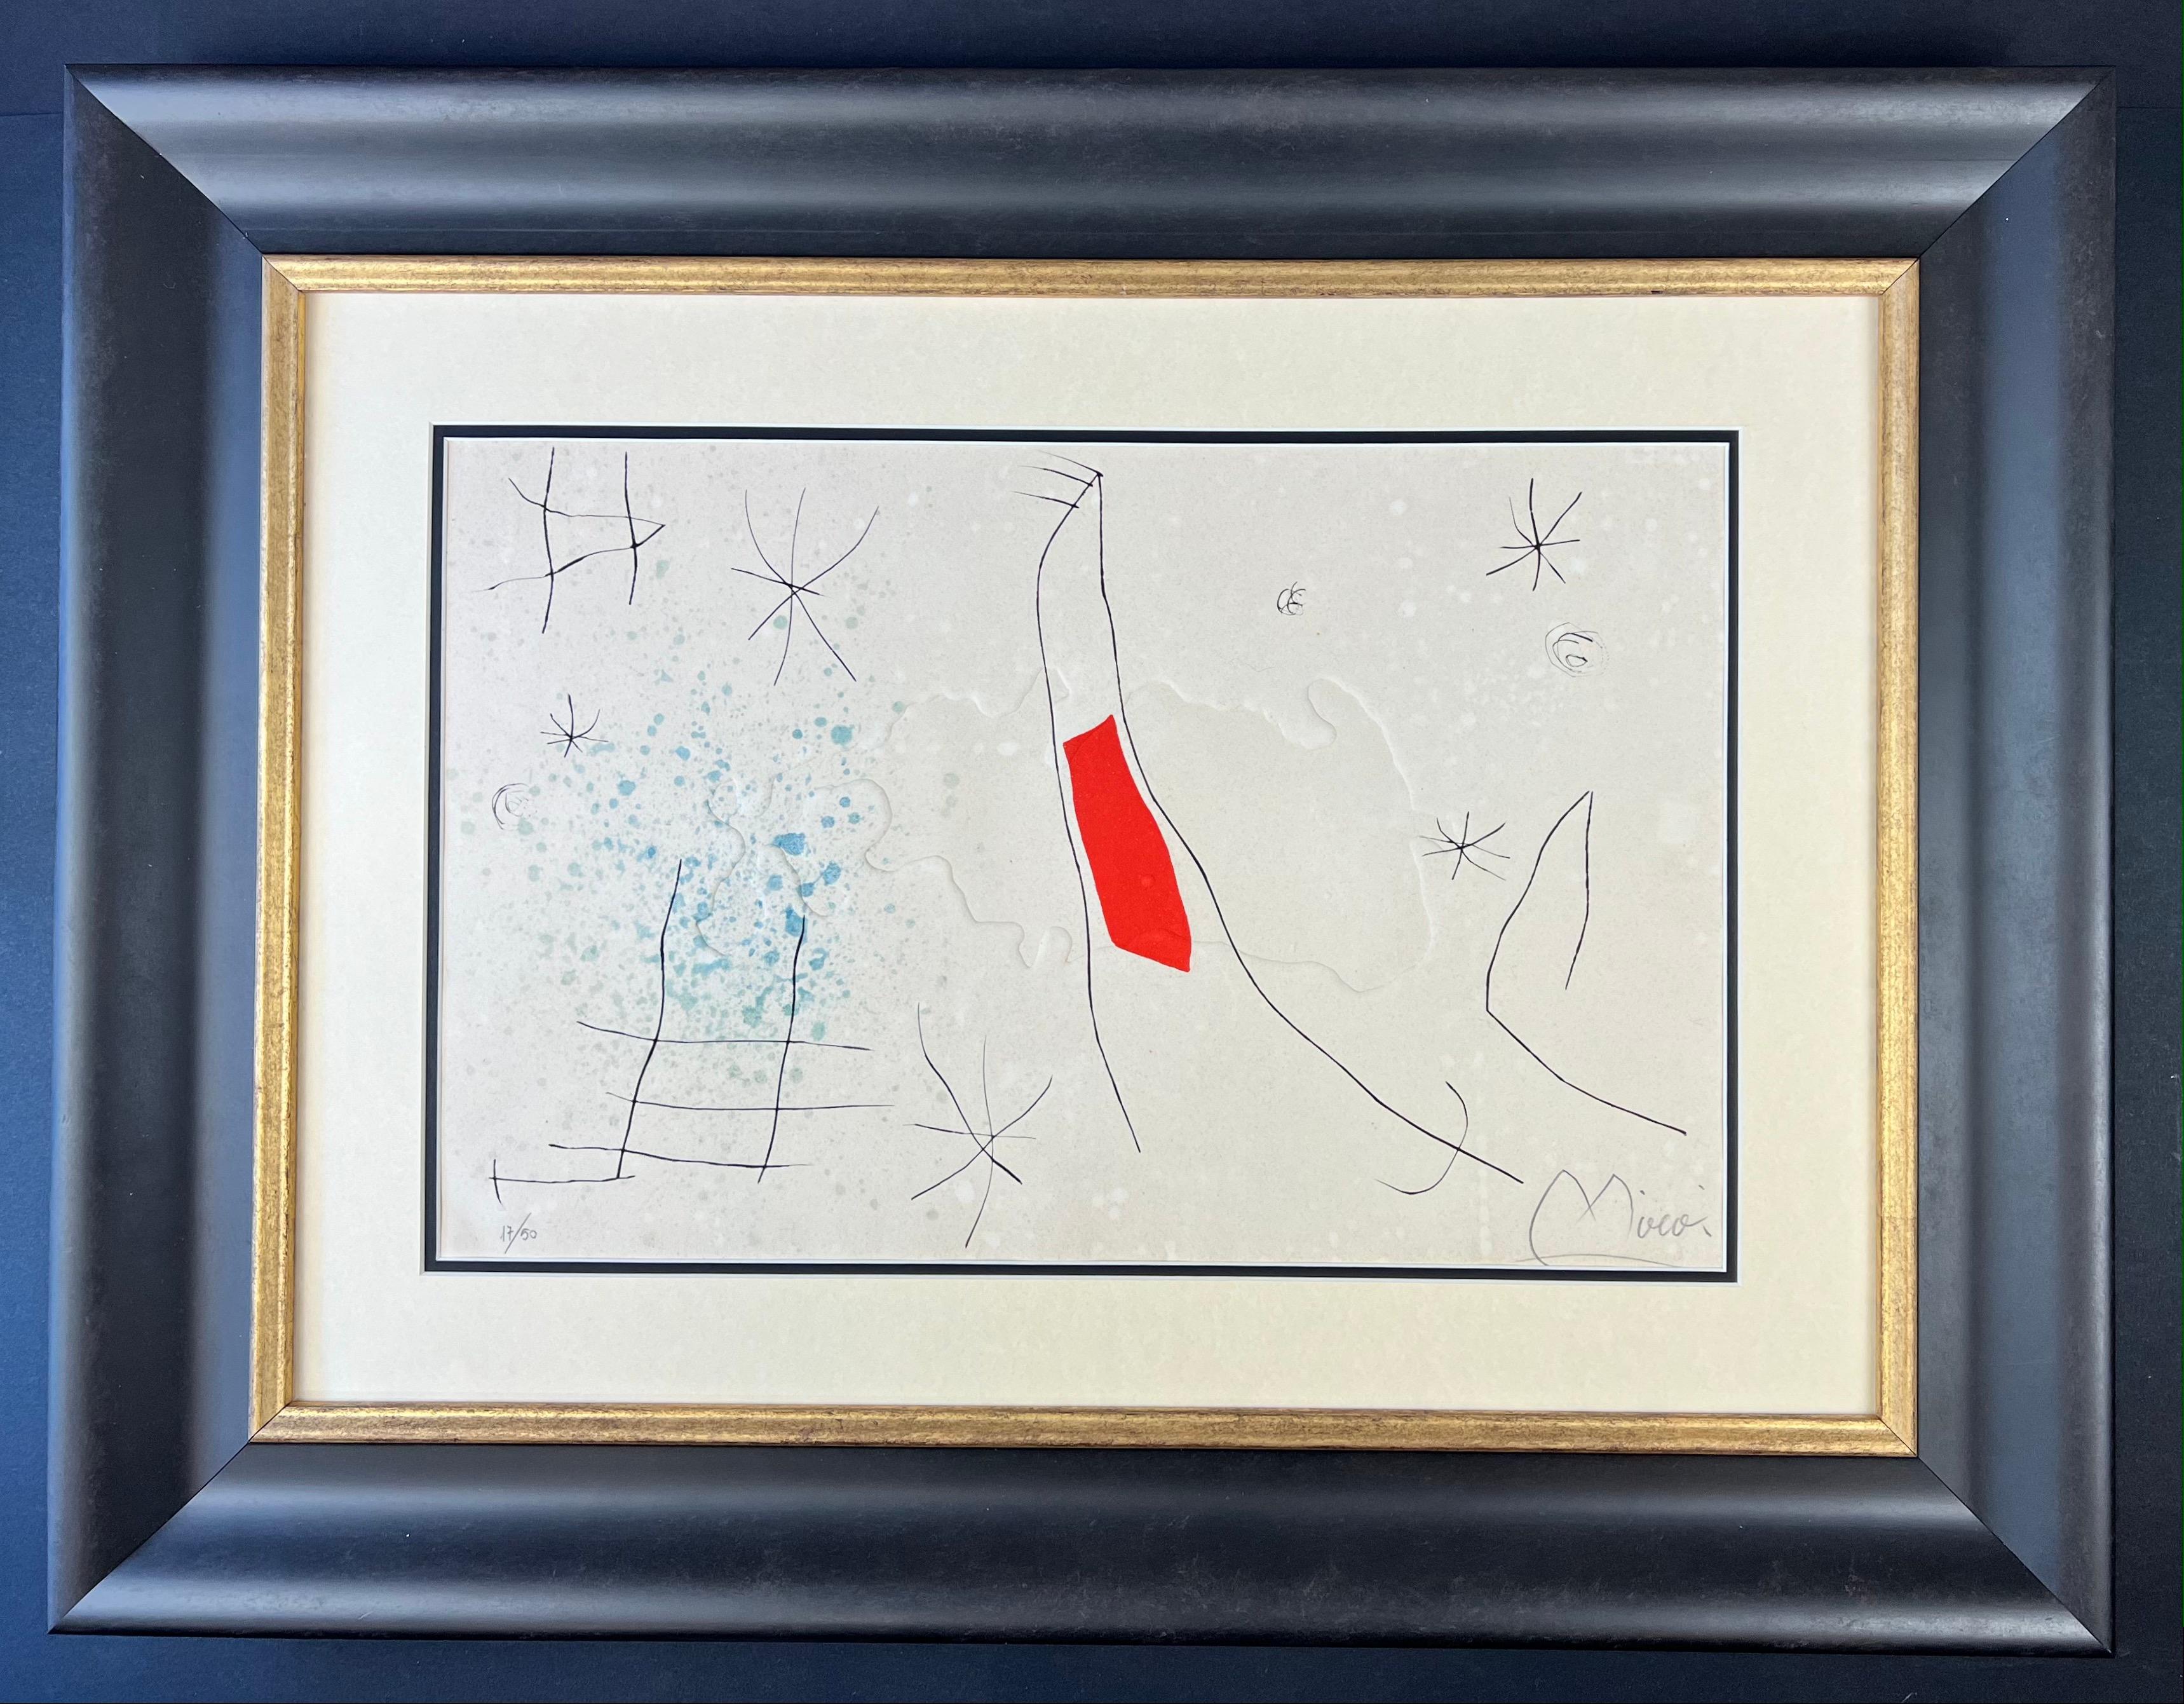 Drypoint , Aquatint & Embossing on Arches paper ,
edited in 1974
Limited edition of 50 copies
signed in pencil by artist in lower right corner and numbered 17/50 in lower left corner
Framed size: 57,5 x 75 cm
Paper size : 33 x 51 cm
very good